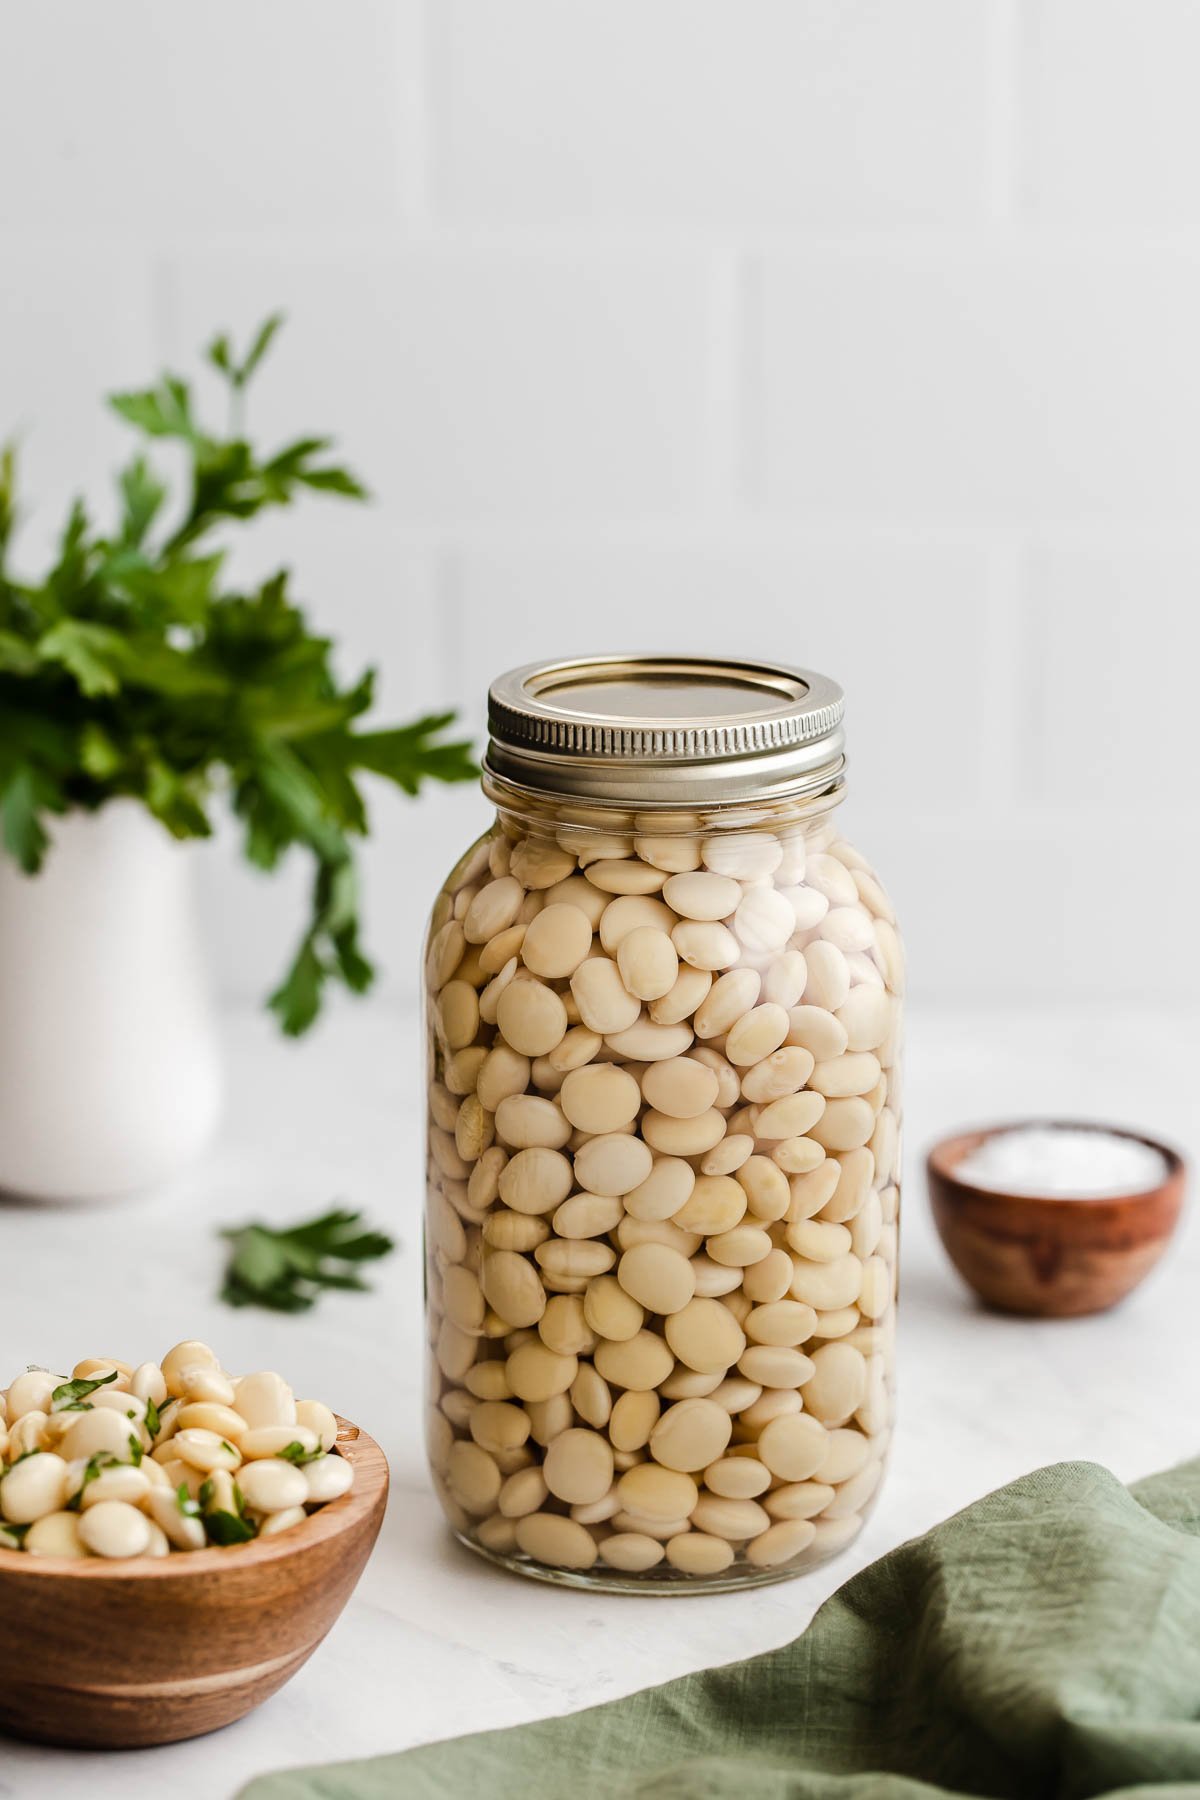 Glass mason jar full of lupini beans with herbs in background.